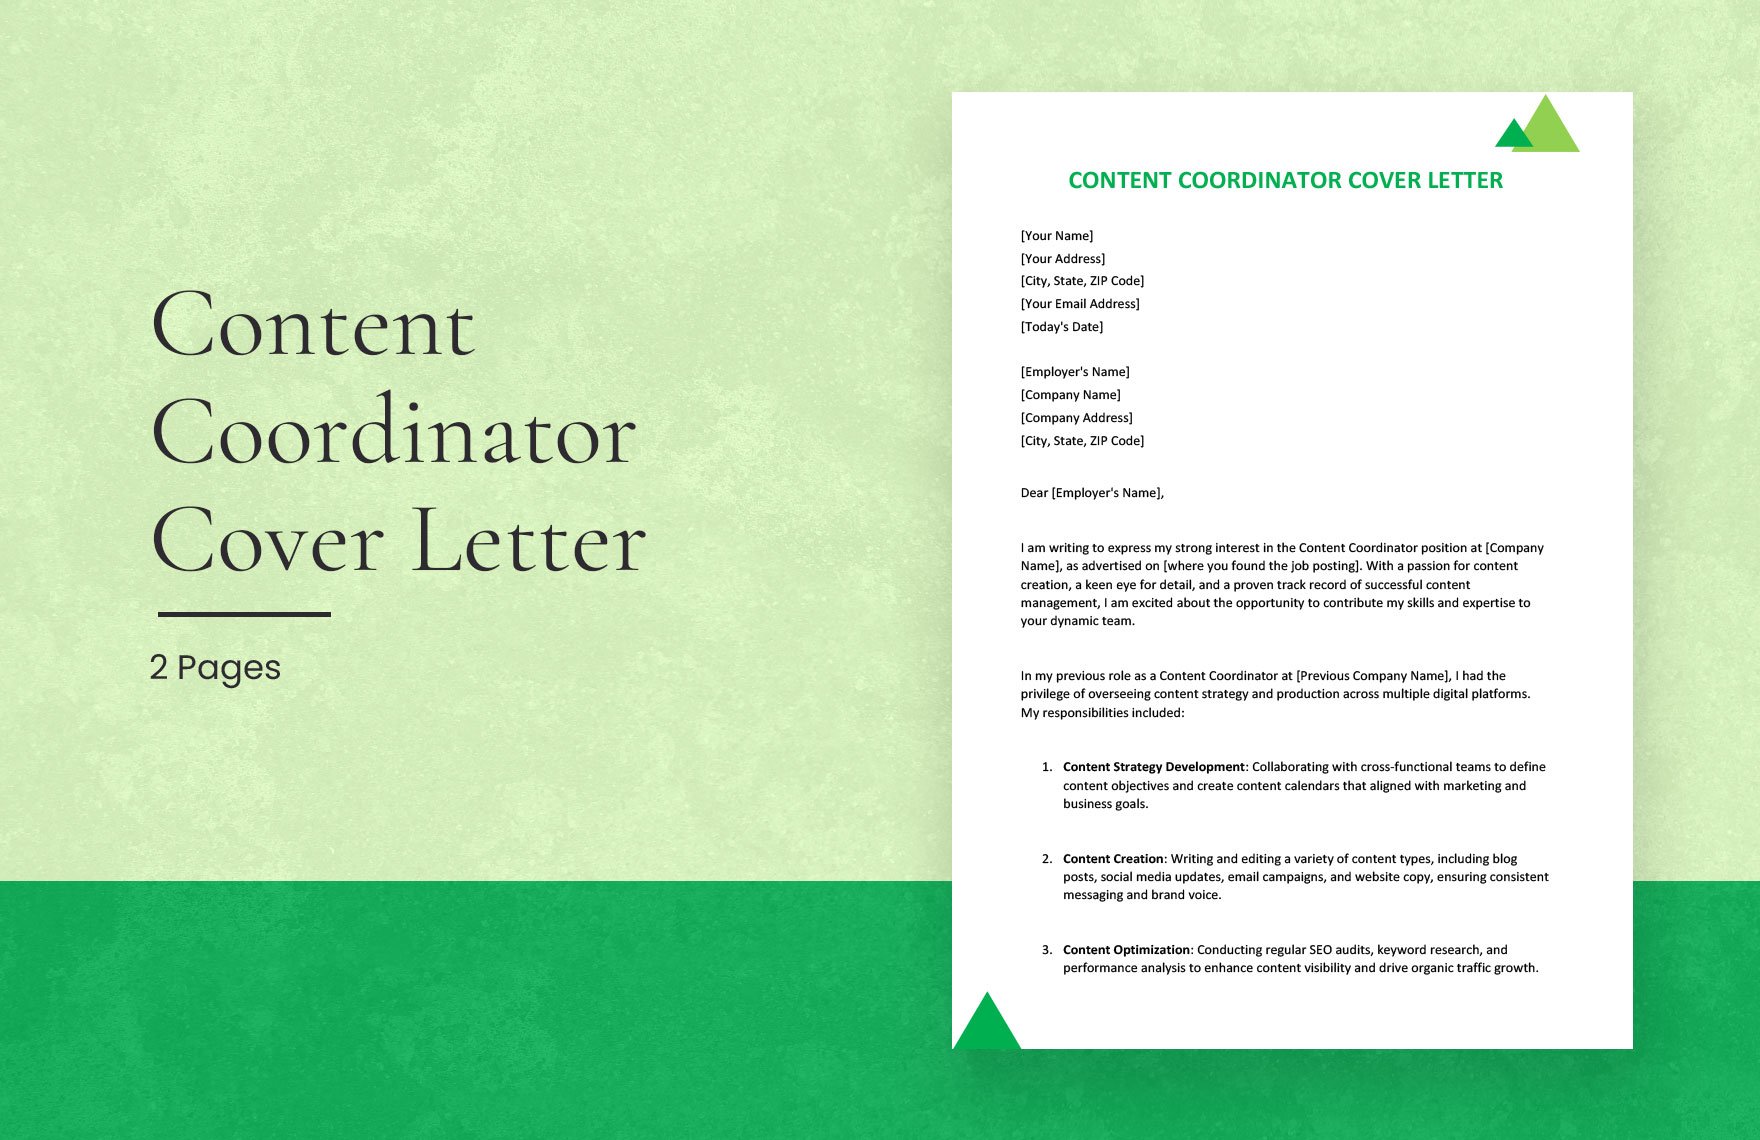 Content Coordinator Cover Letter